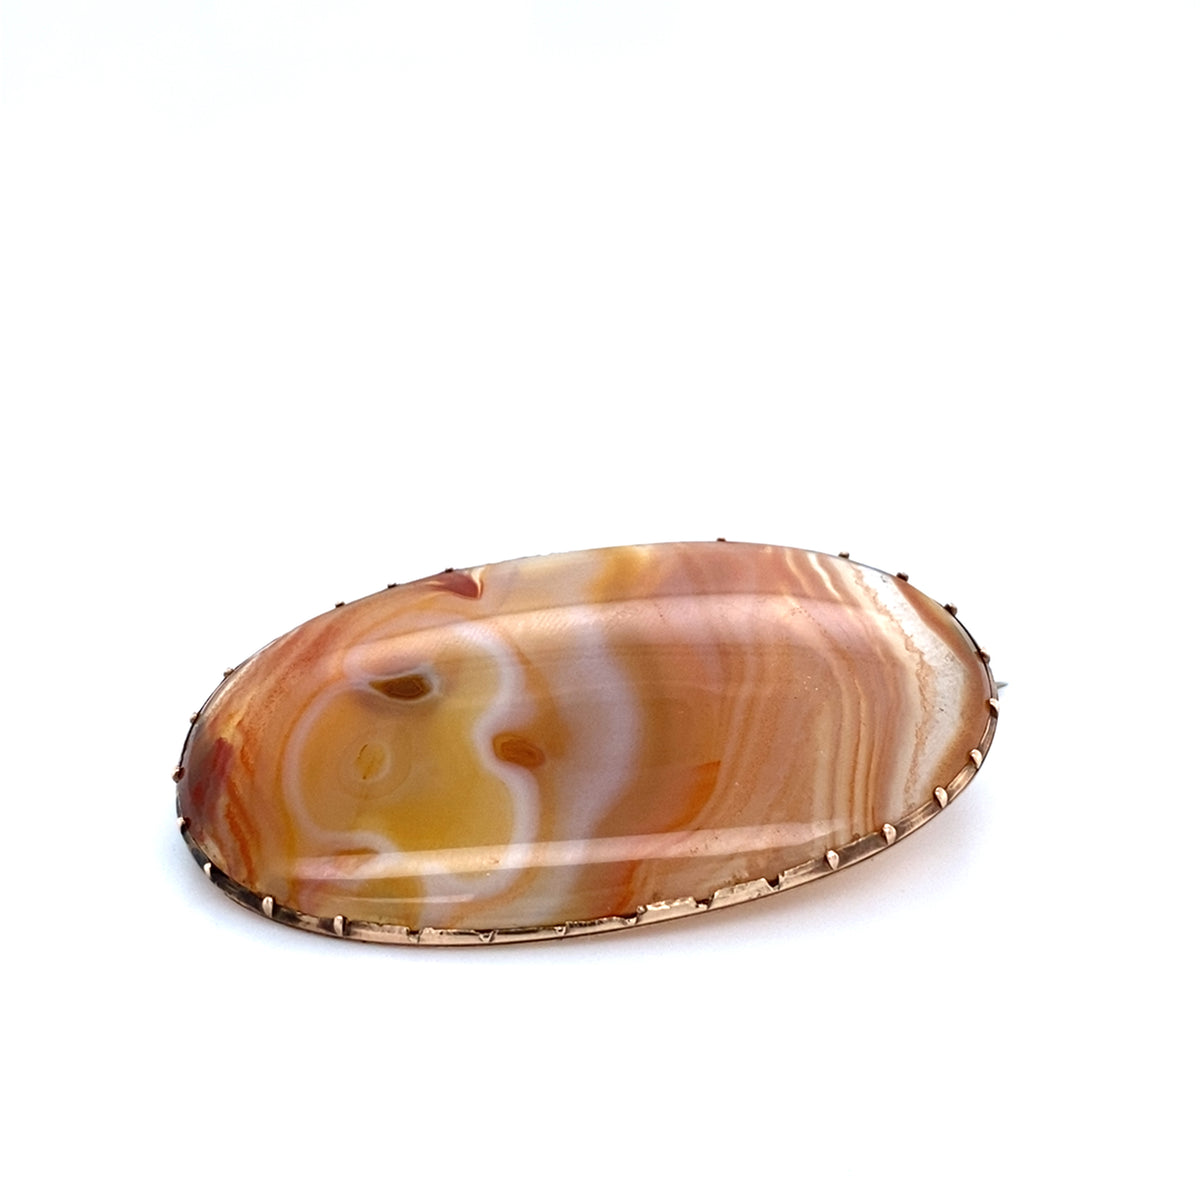 Antique Banded Agate Brooch